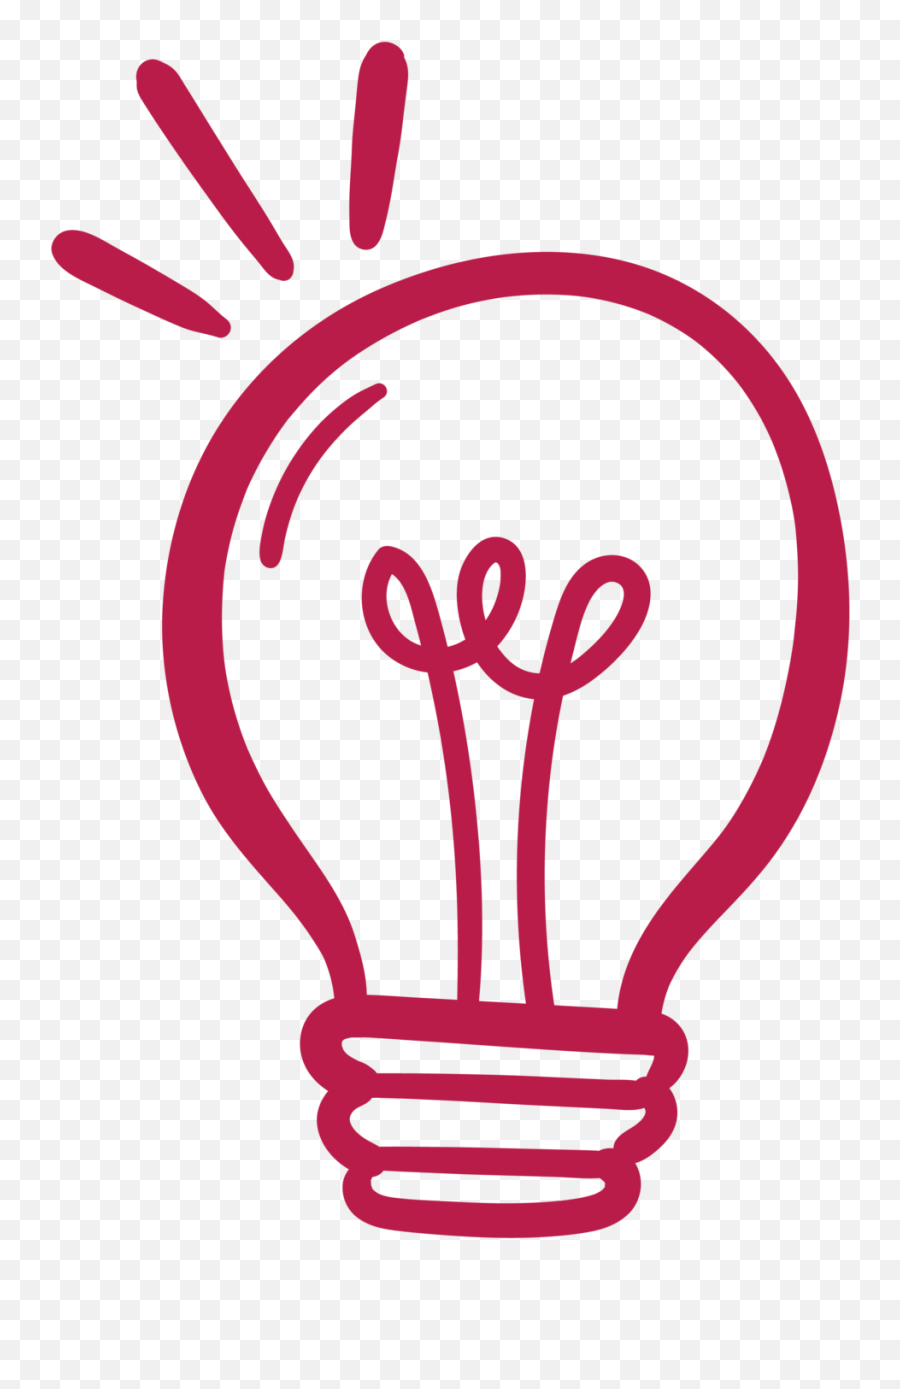 Products And Services - Light Bulb Png,Red Lighbulb Icon